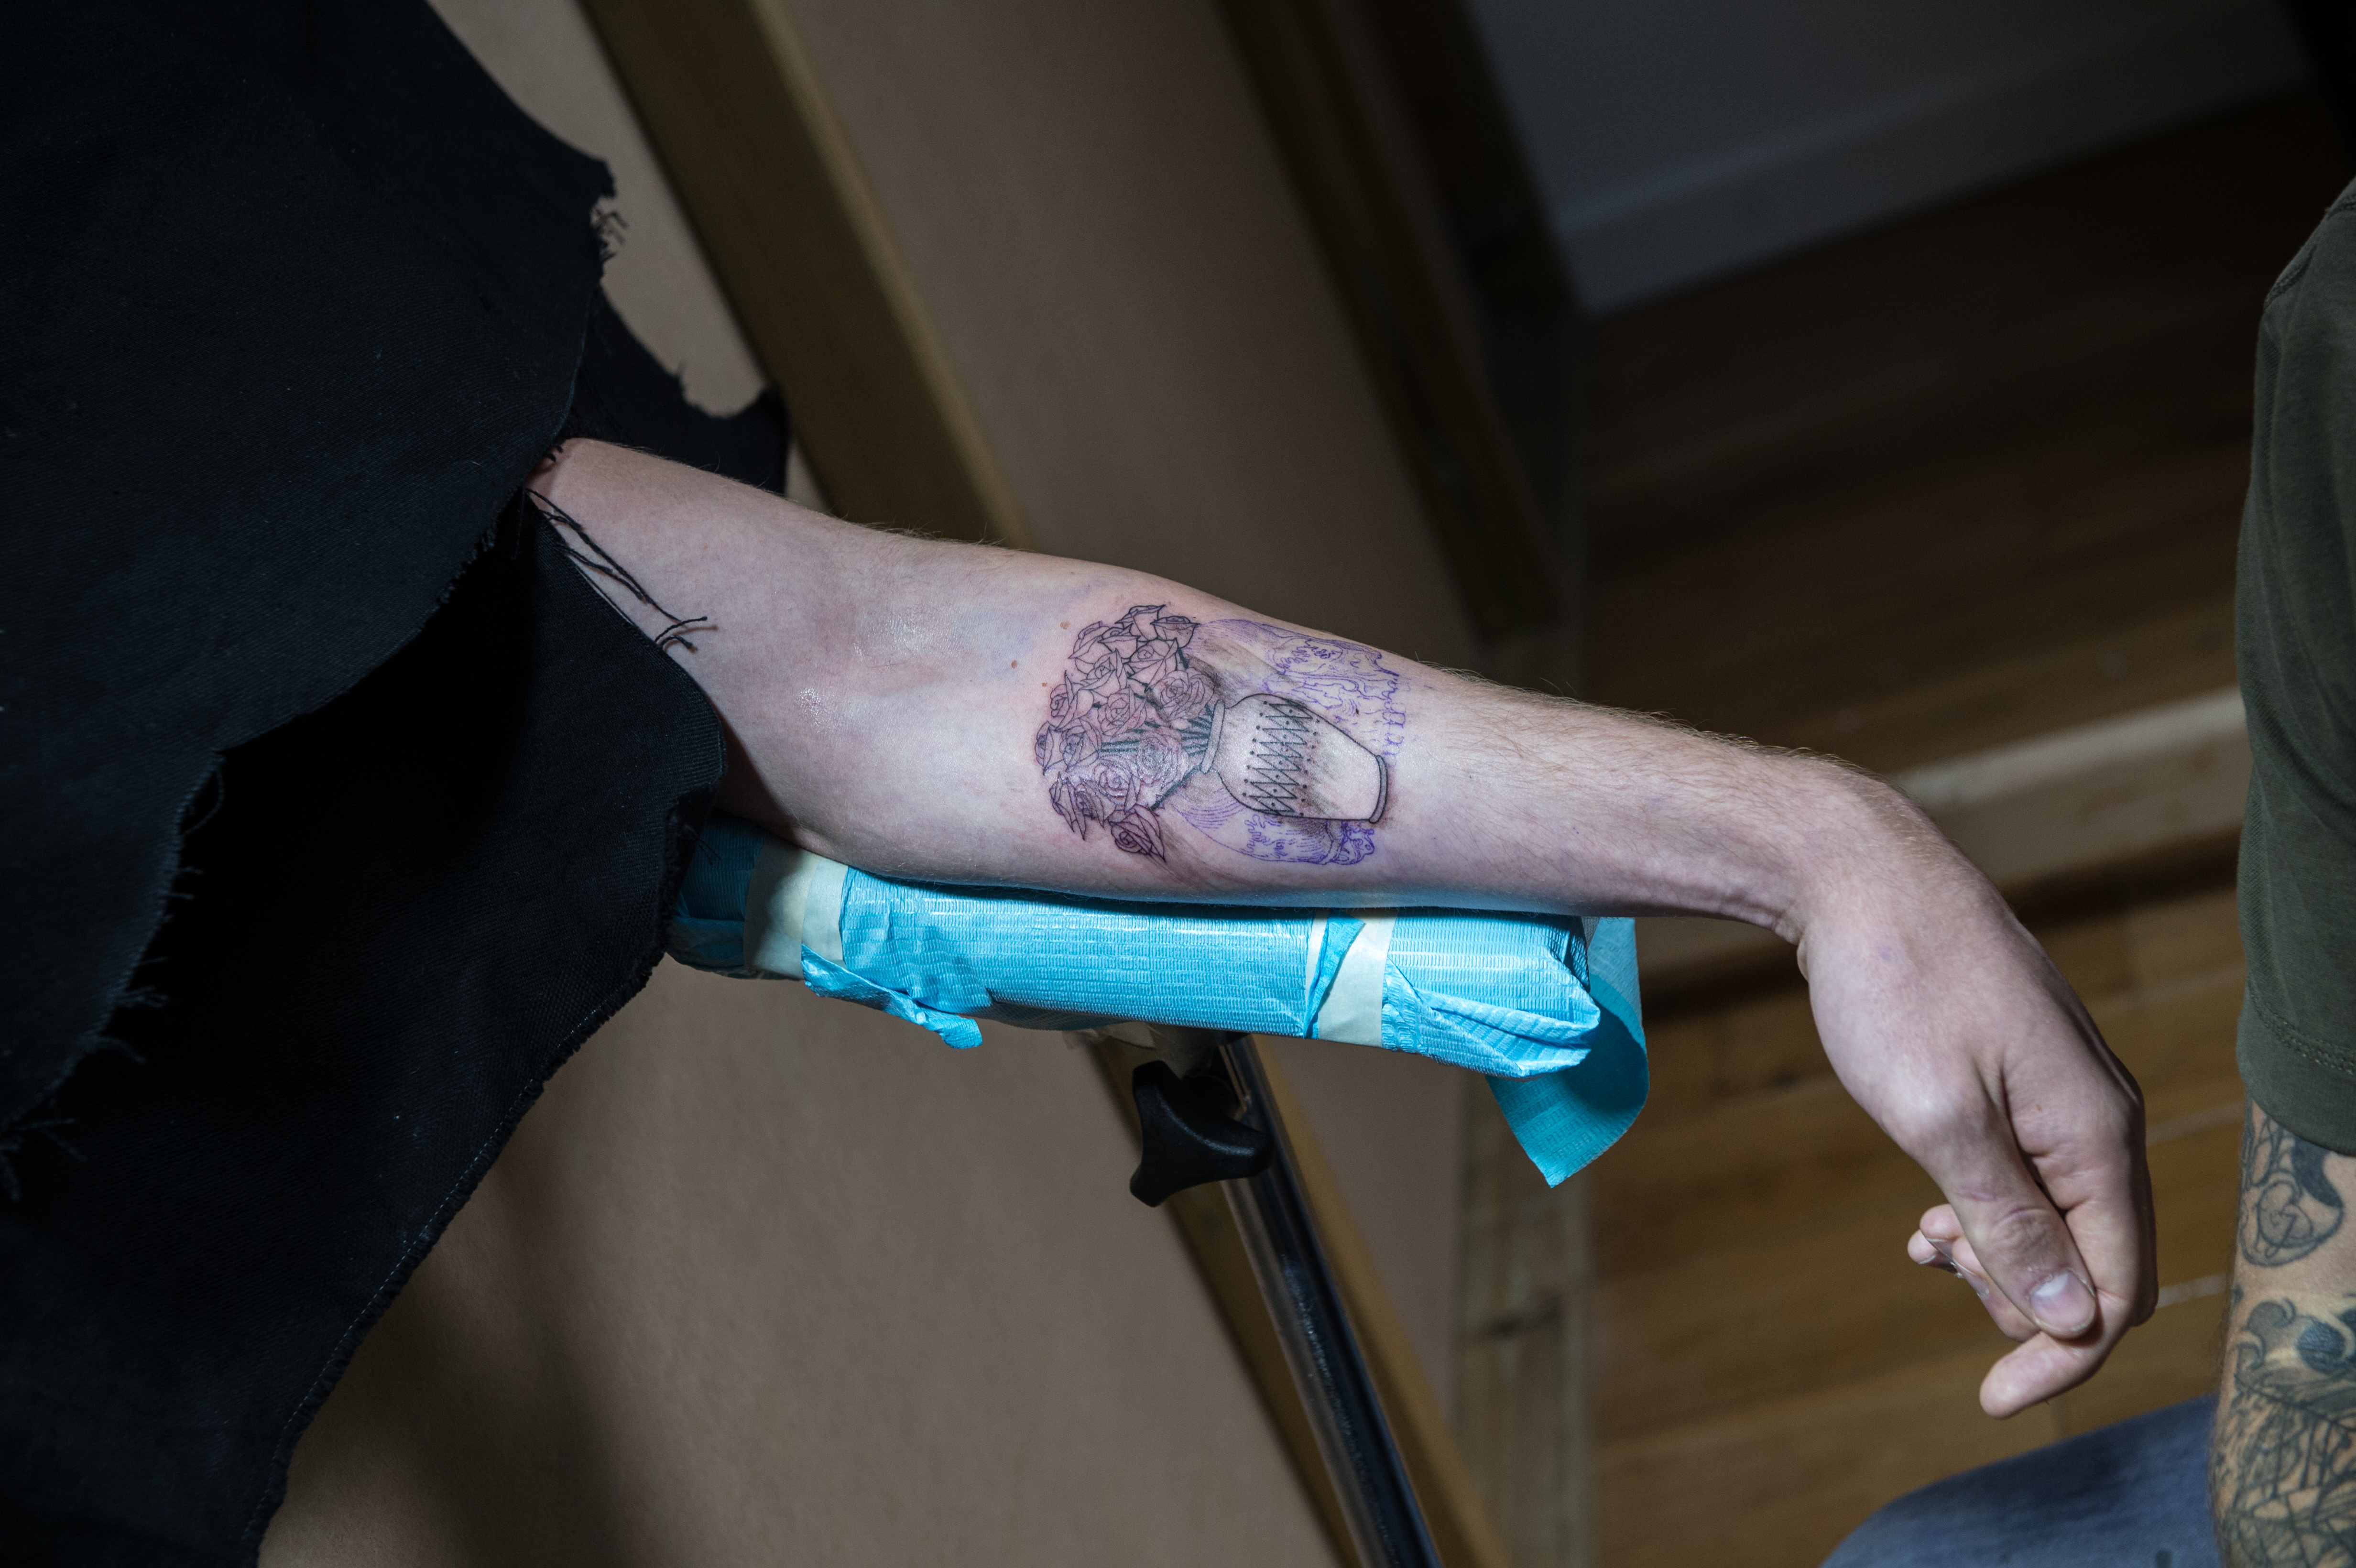 Tattoo Infection Signs and Symptoms